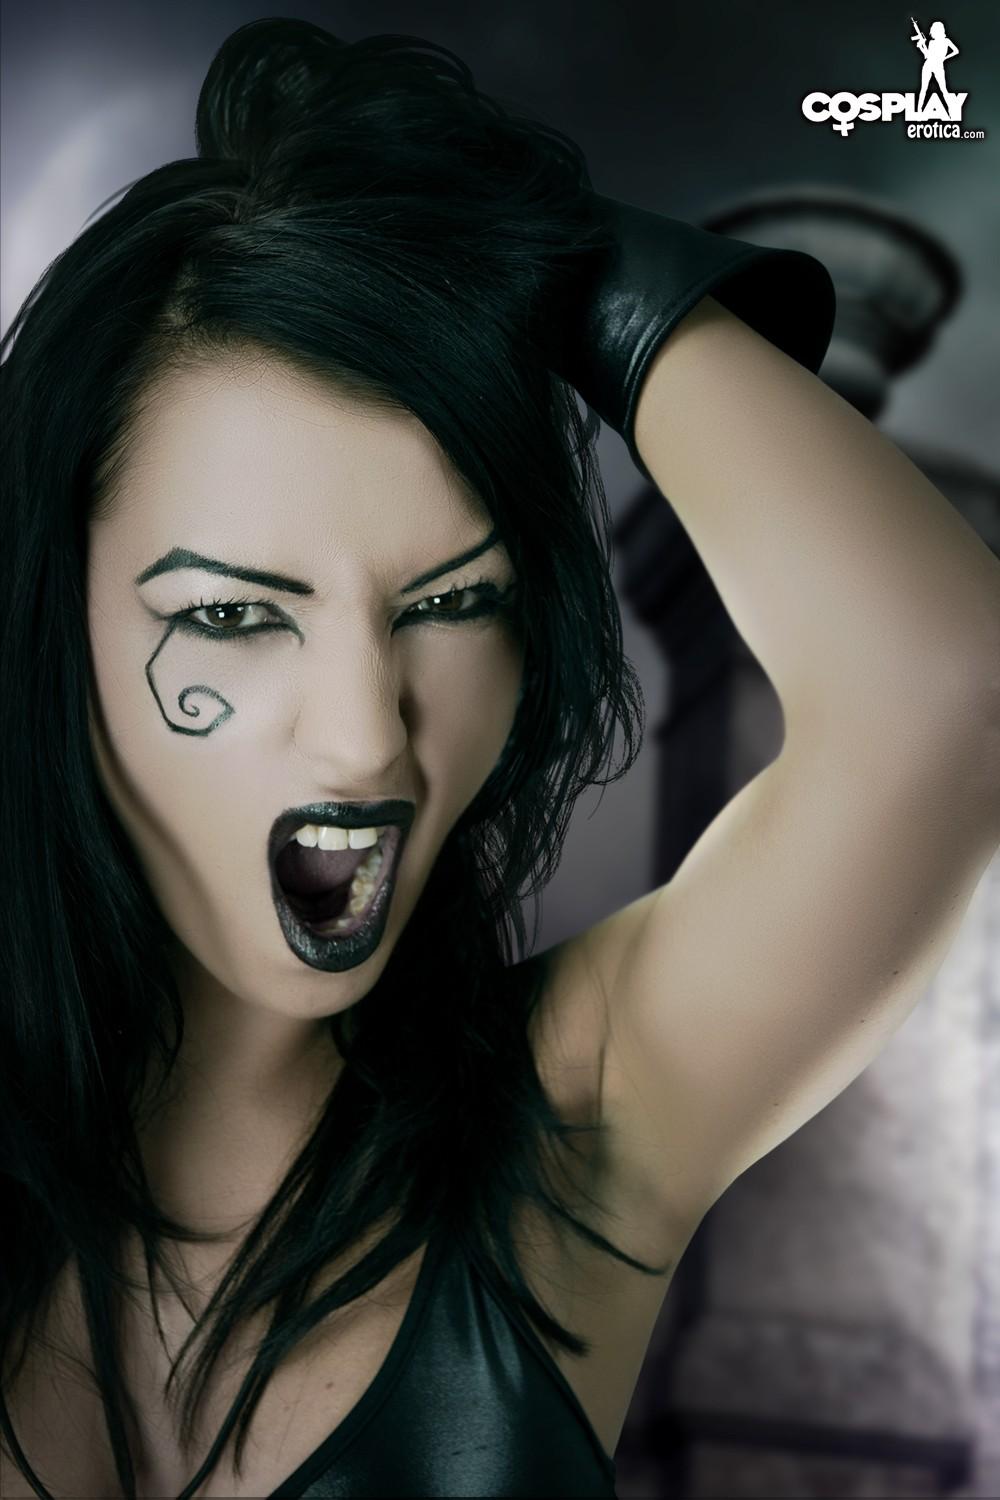 Cosplay babe Mea Lee gets her goth geek on #59444677